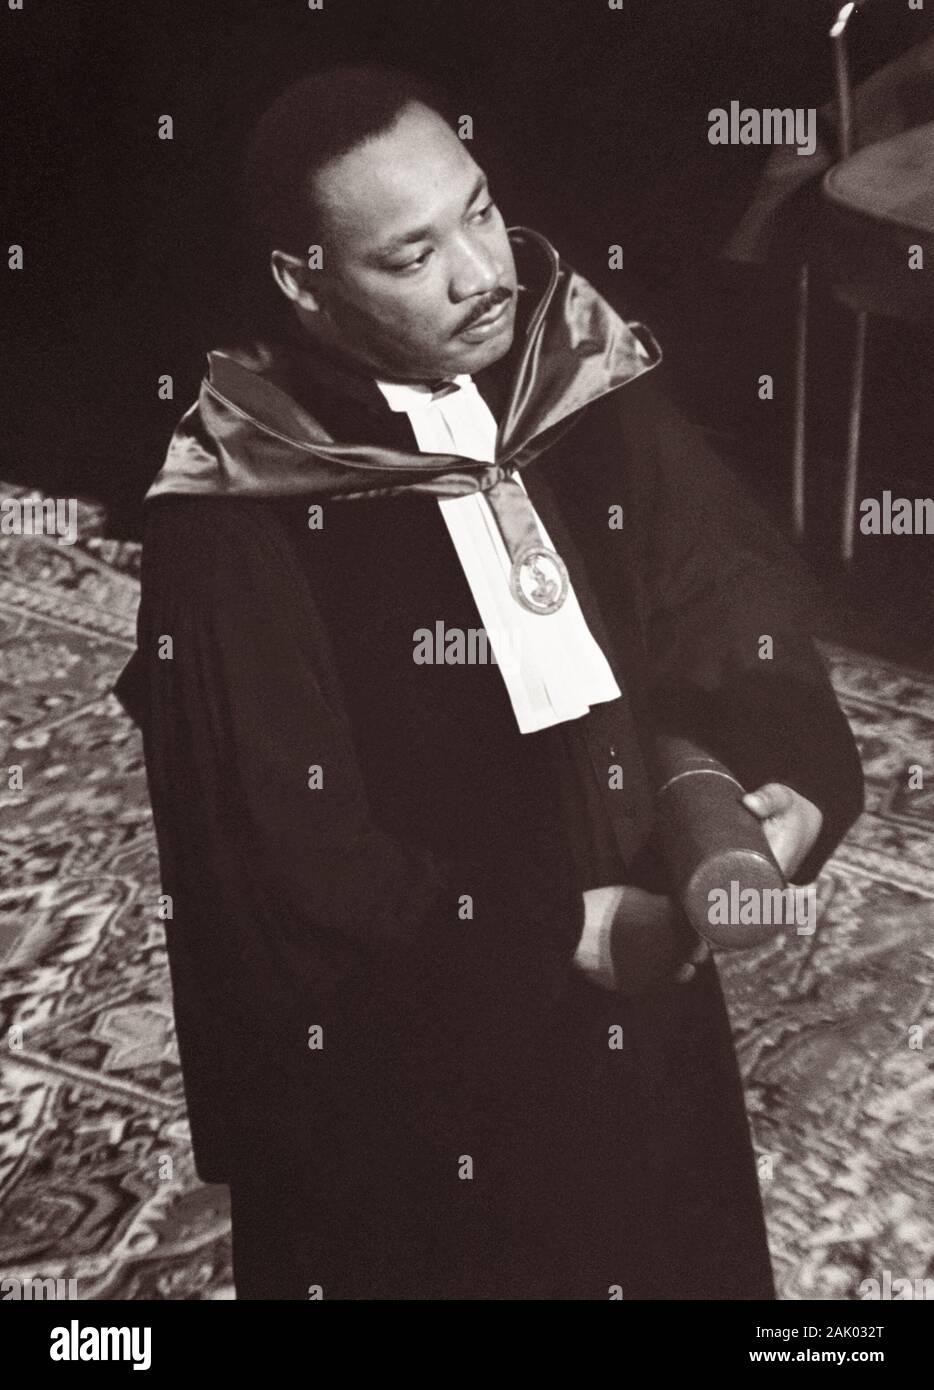 Dr. Martin Luther King was awarded a honorary doctorate in Social Science by the VU (Vrije Universiteit, 'Free University') in Amsterdam, North Holland on October 20, 1965. Stock Photo